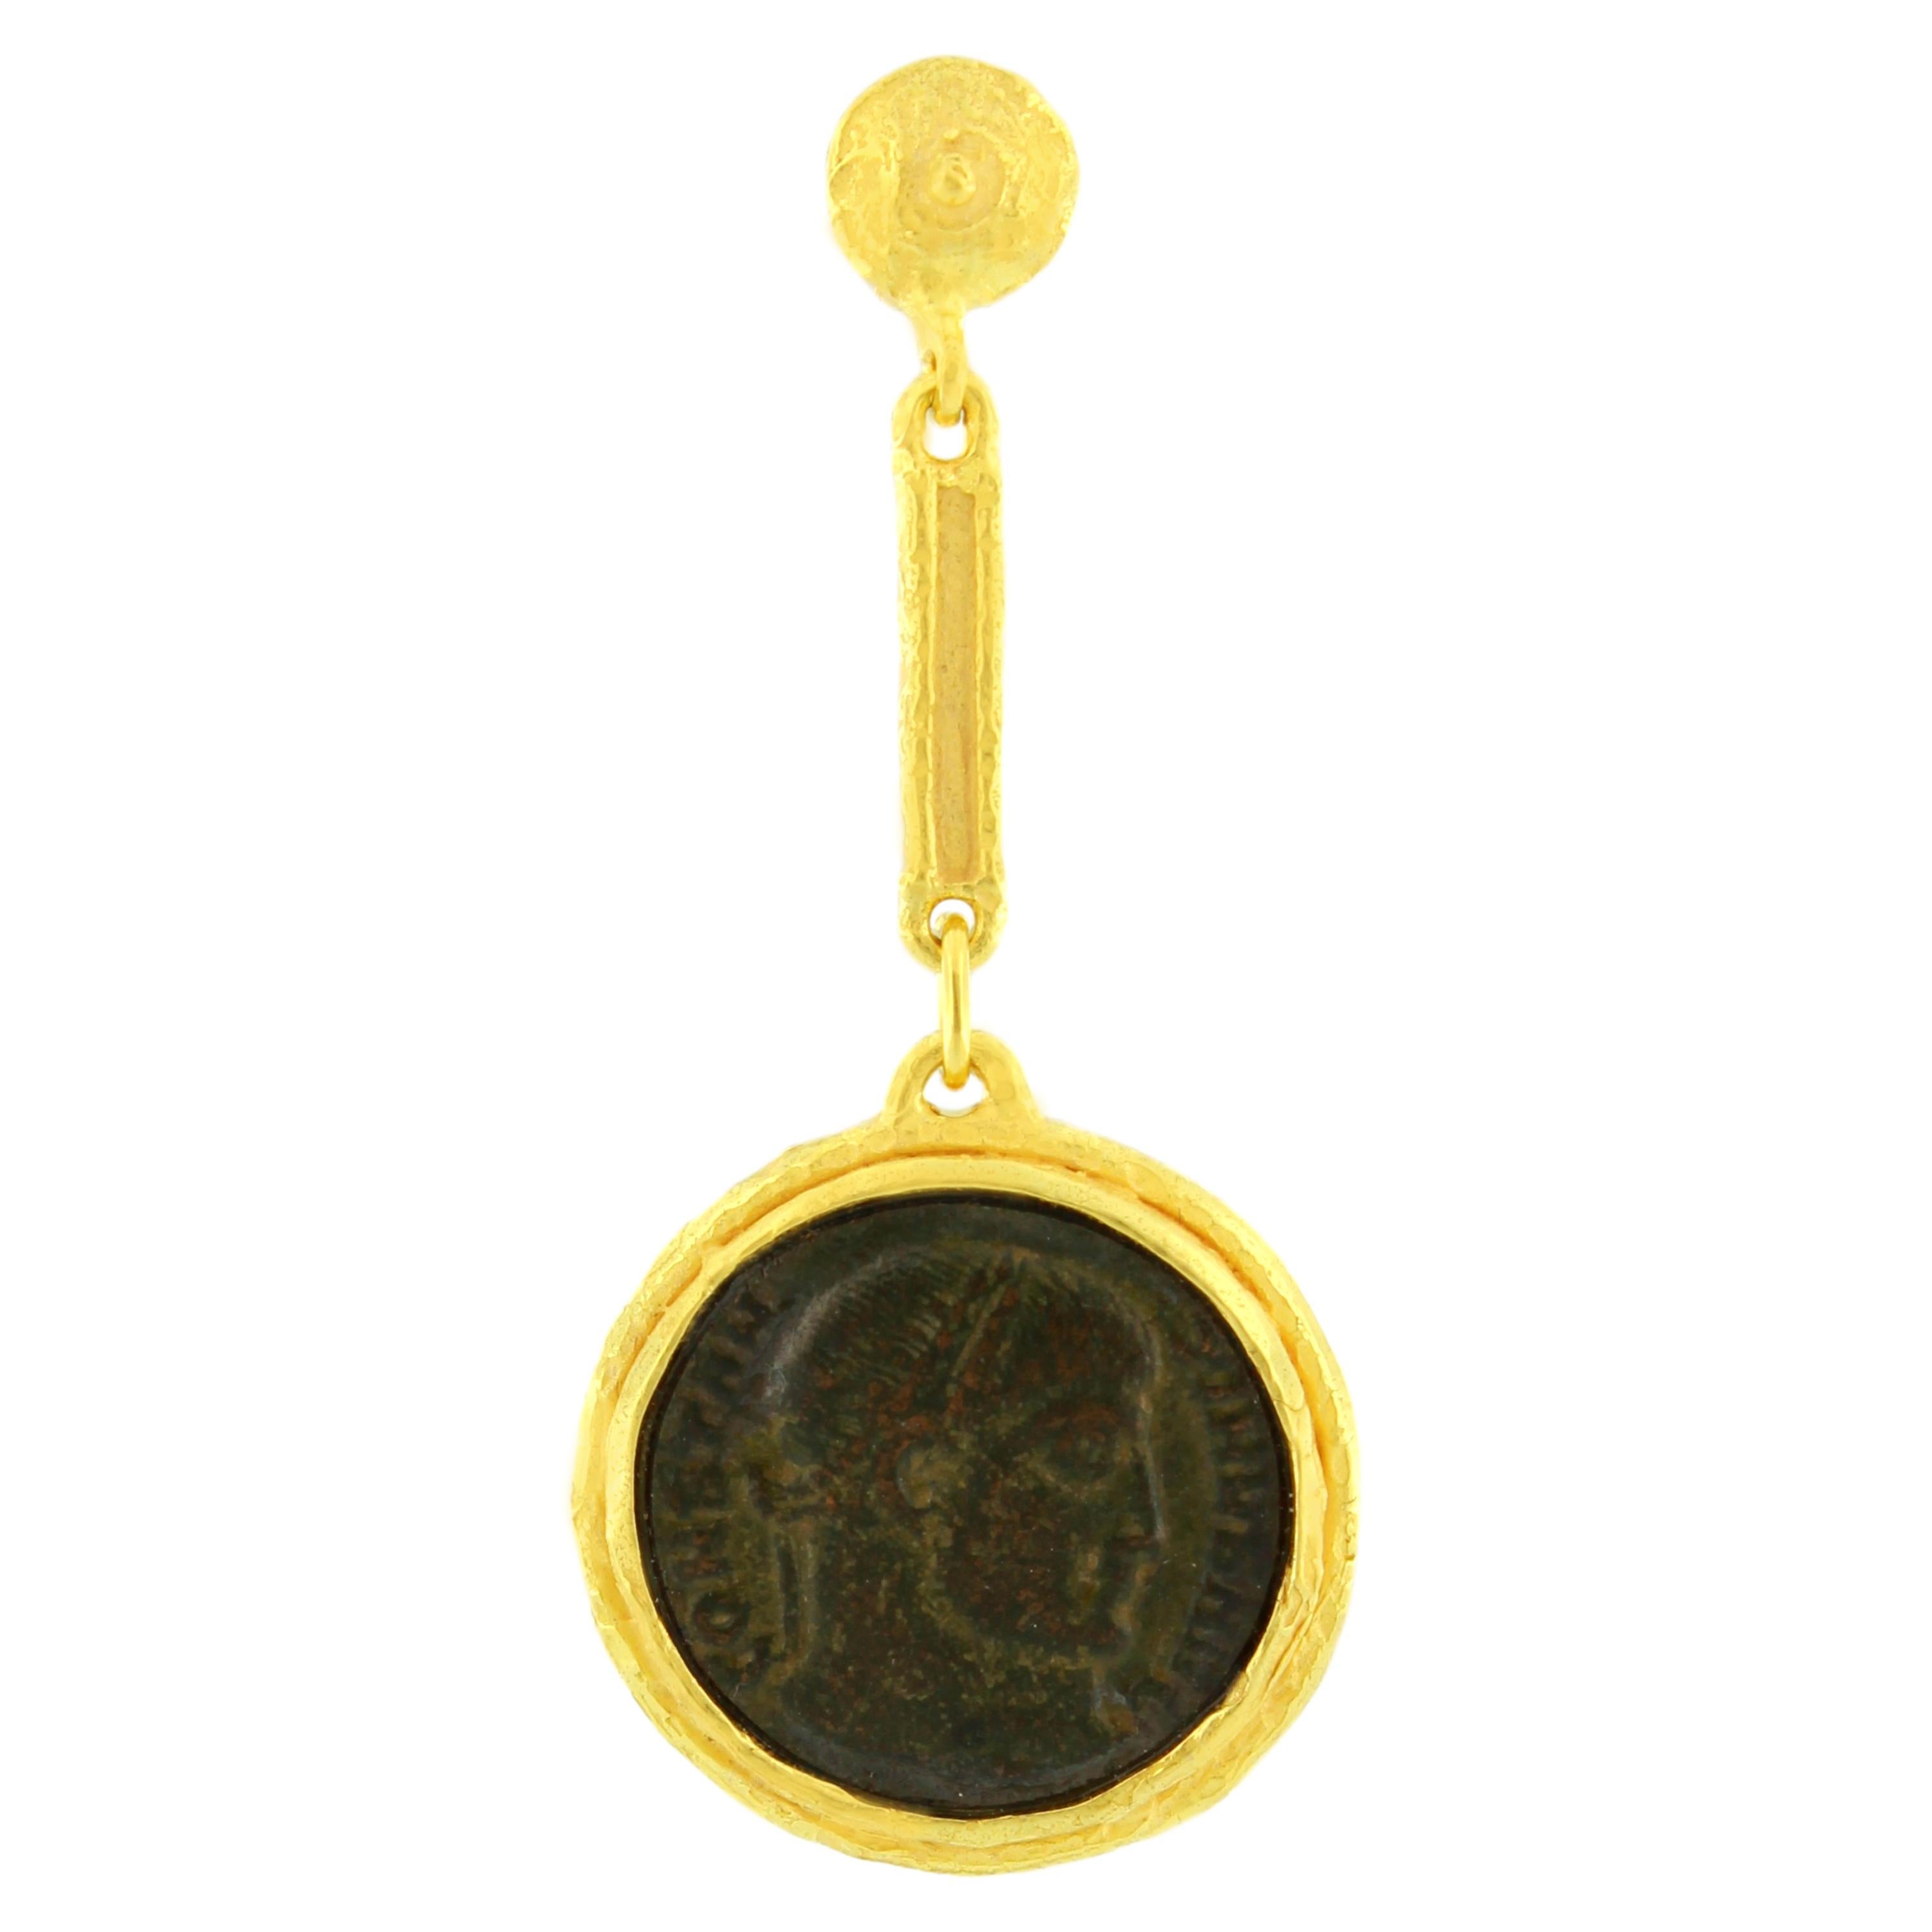 Gorgeous Satin Yellow Gold Dangle Earrings with ancient Roman Coins, from Sacchi’s 